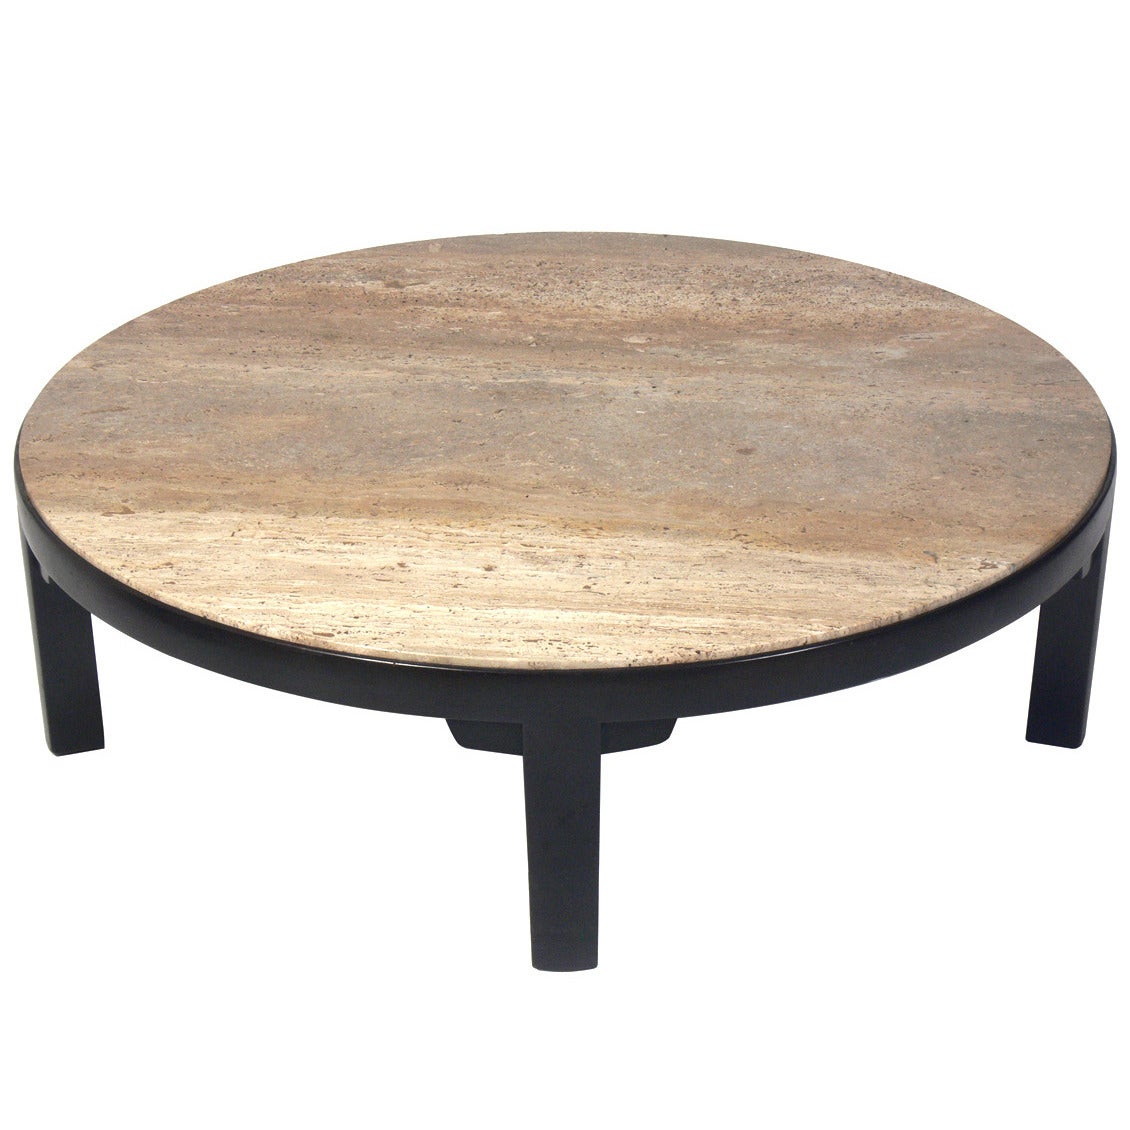 Clean Lined Modern Coffee Table by Edward Wormley for Dunbar